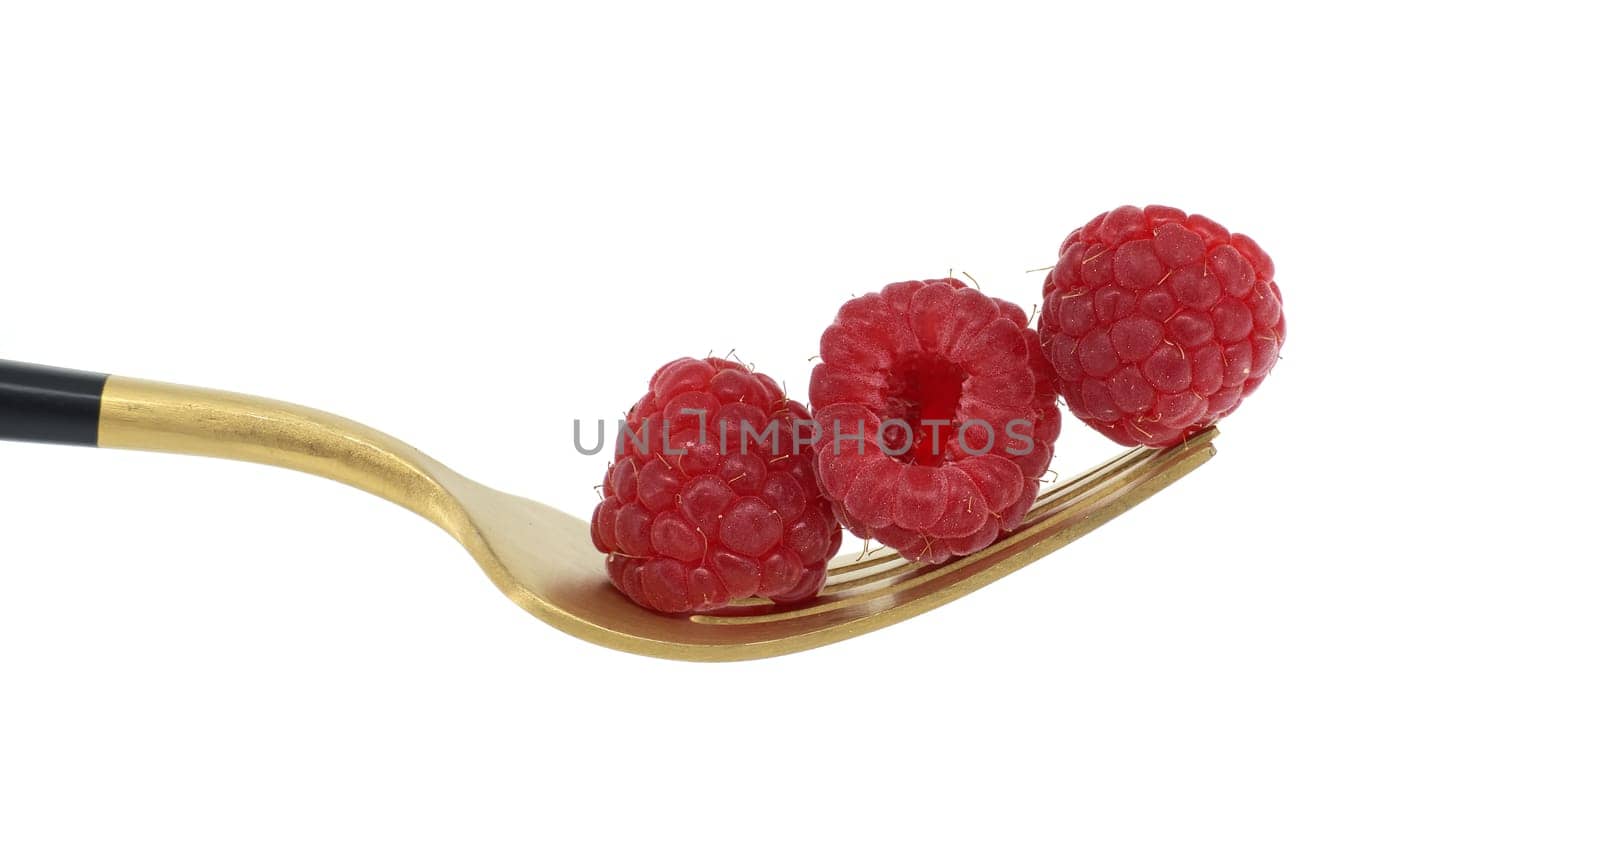 Red raspberries neatly stacked on the prongs of a gold fork with a black handle isolated on a white background, Healthy diet, organic food concept